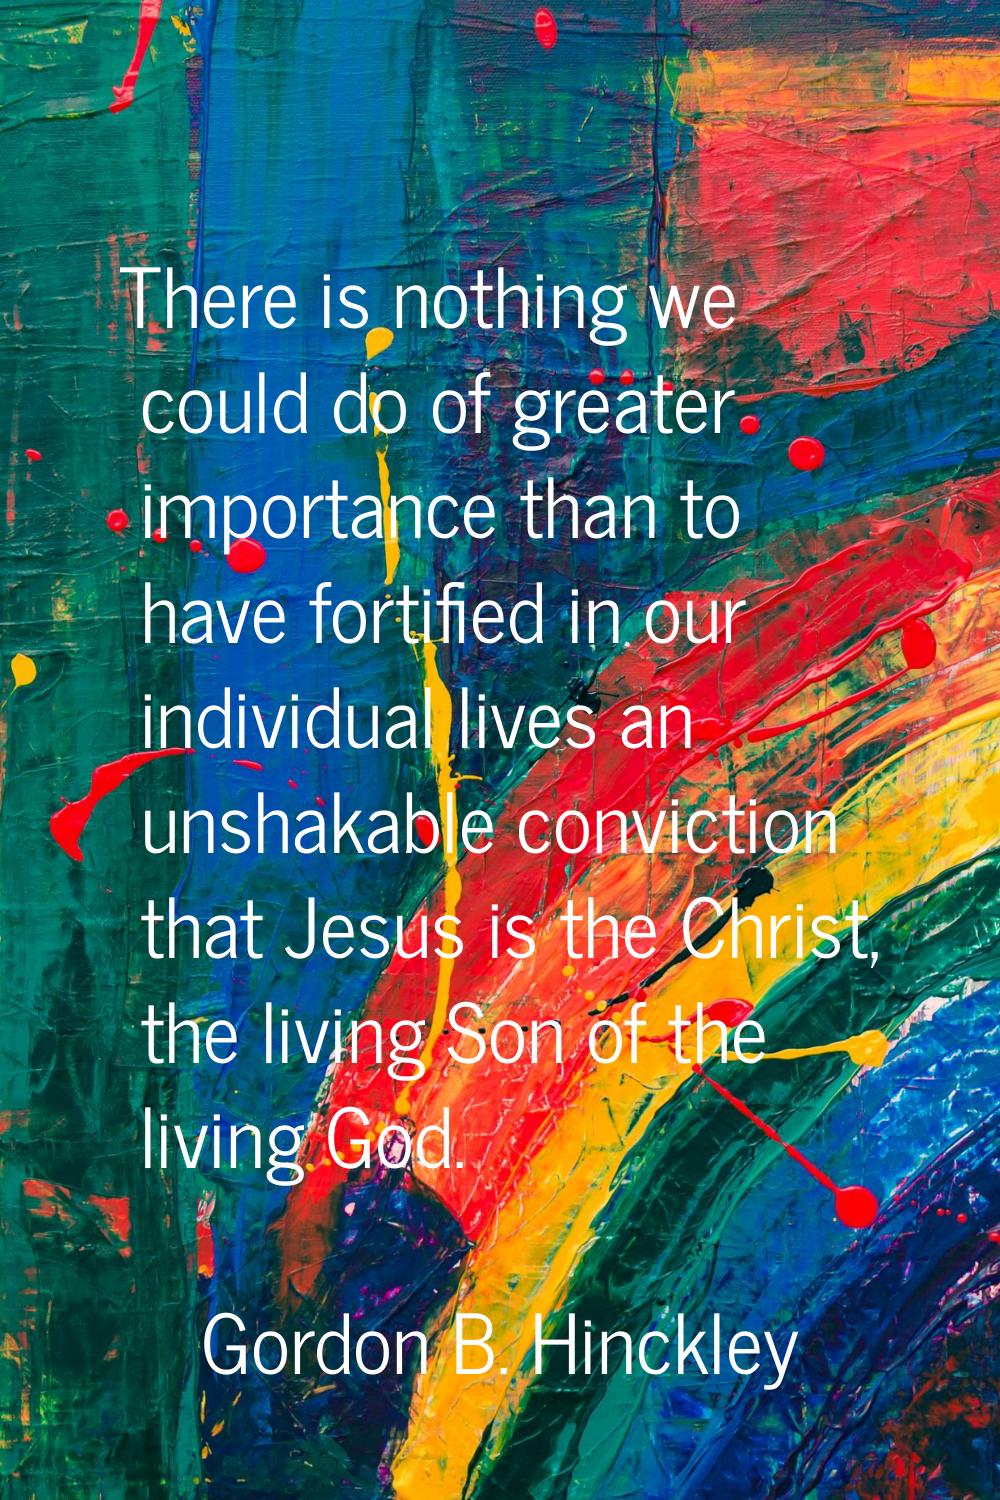 There is nothing we could do of greater importance than to have fortified in our individual lives a